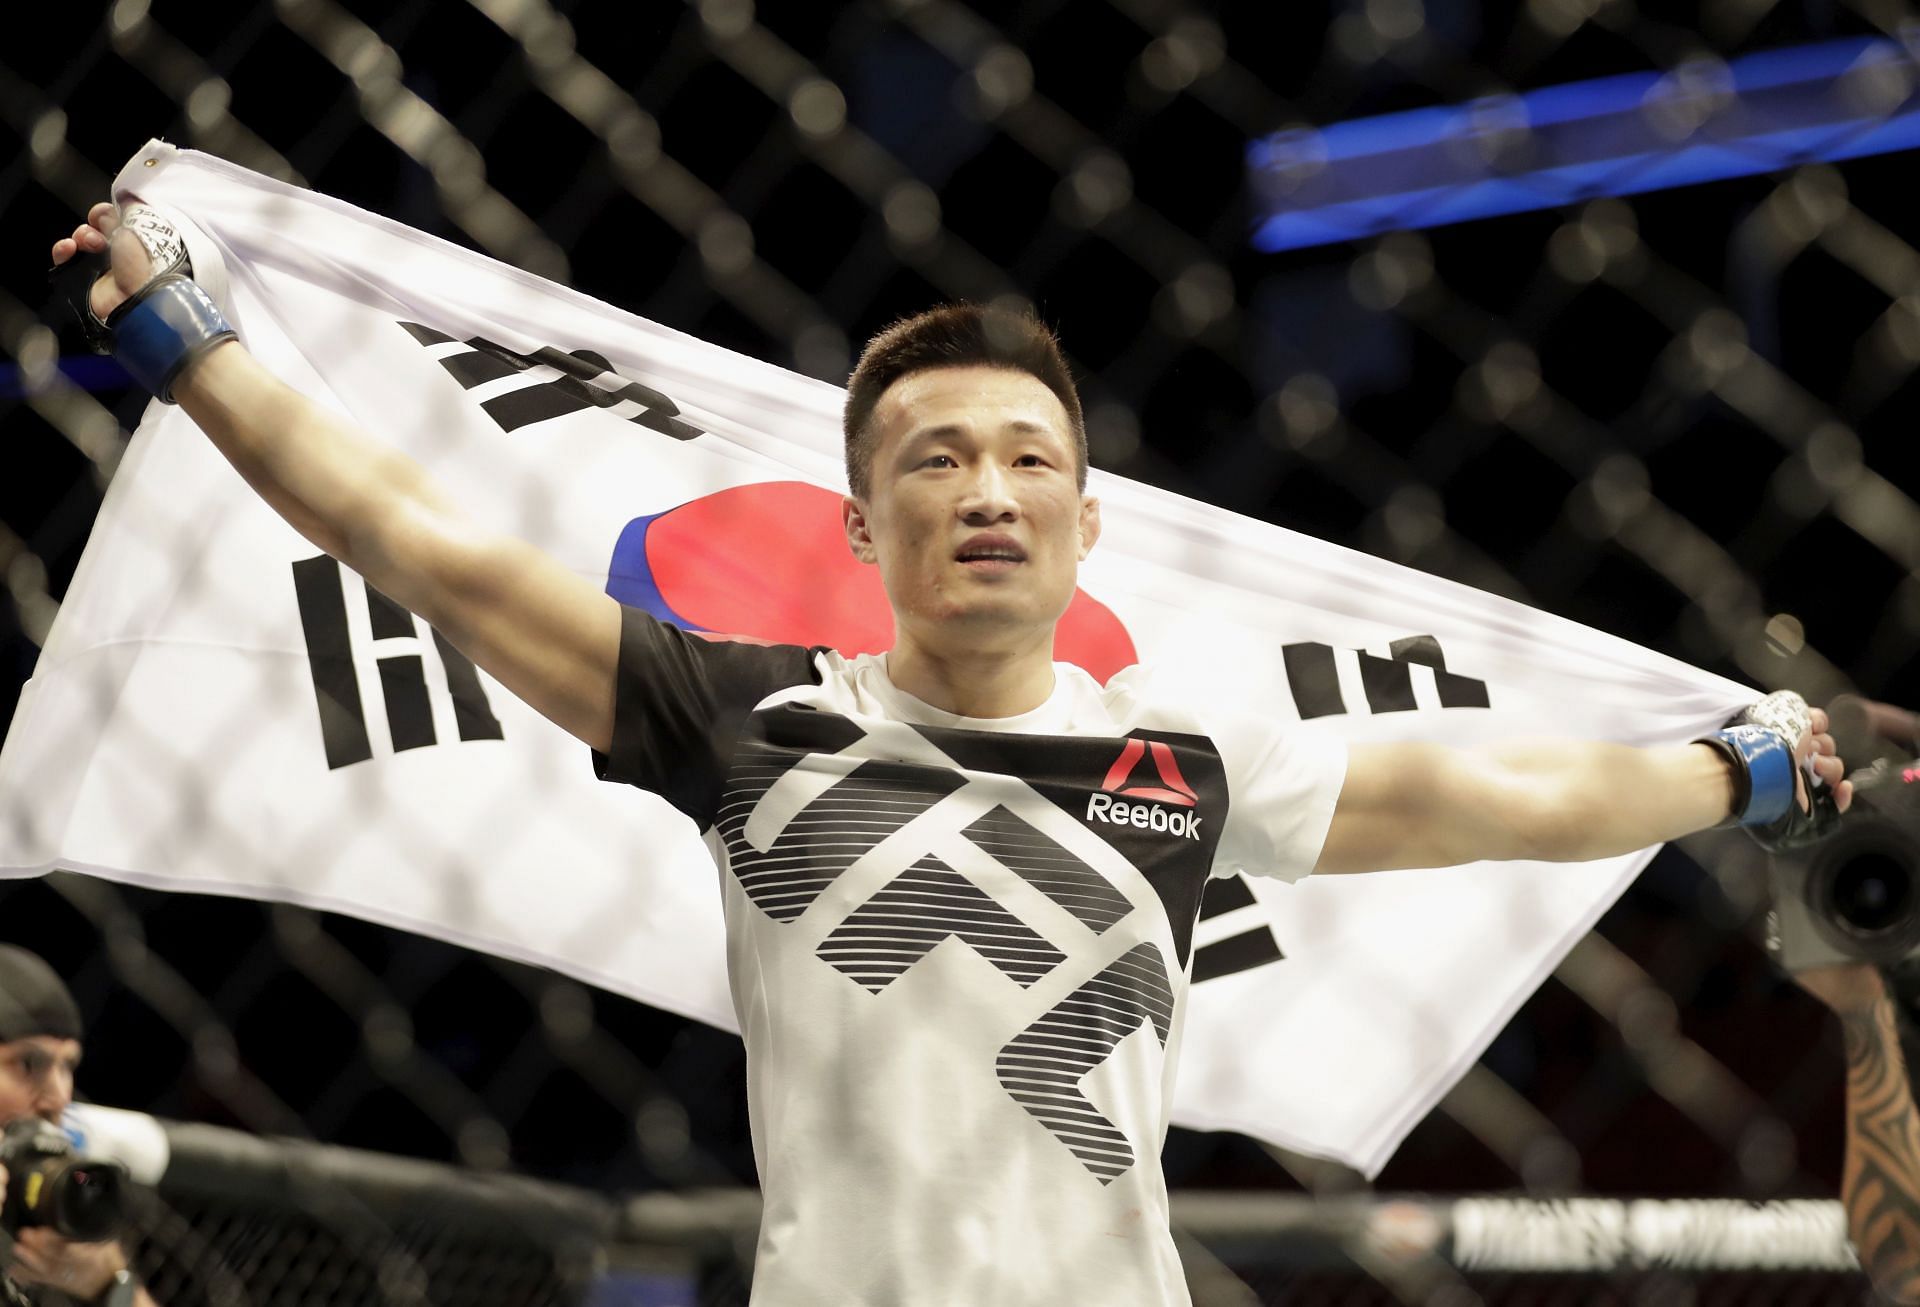 Chan Sung Jung is ranked no. 7 at featherweight